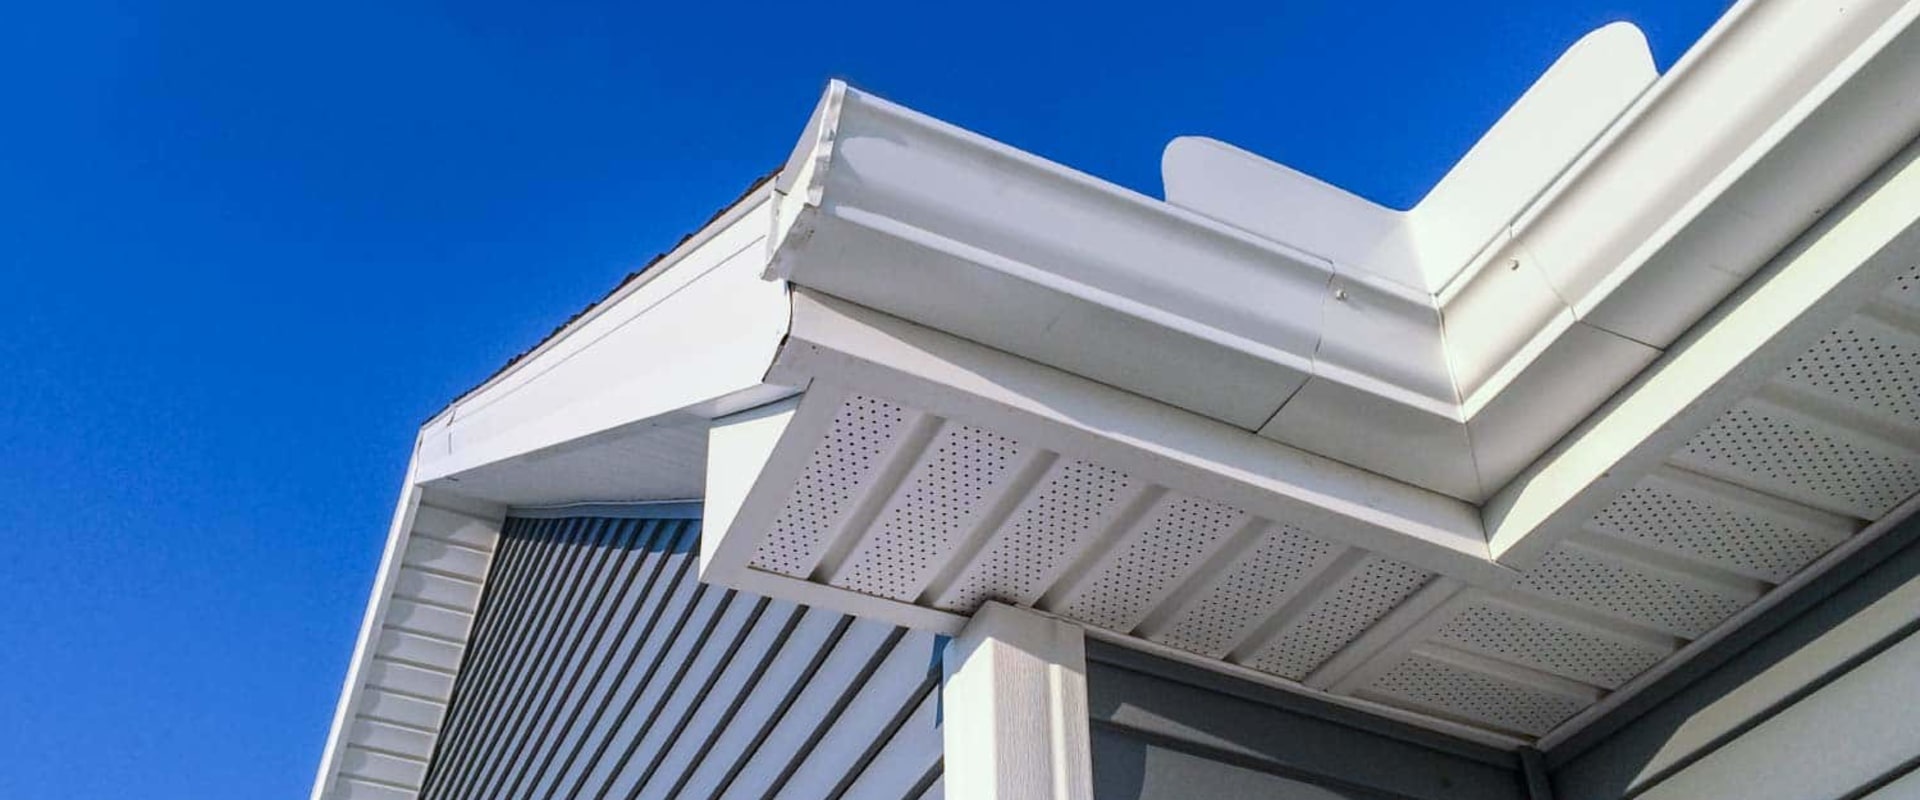 What is the Best Material for Rain Gutters?